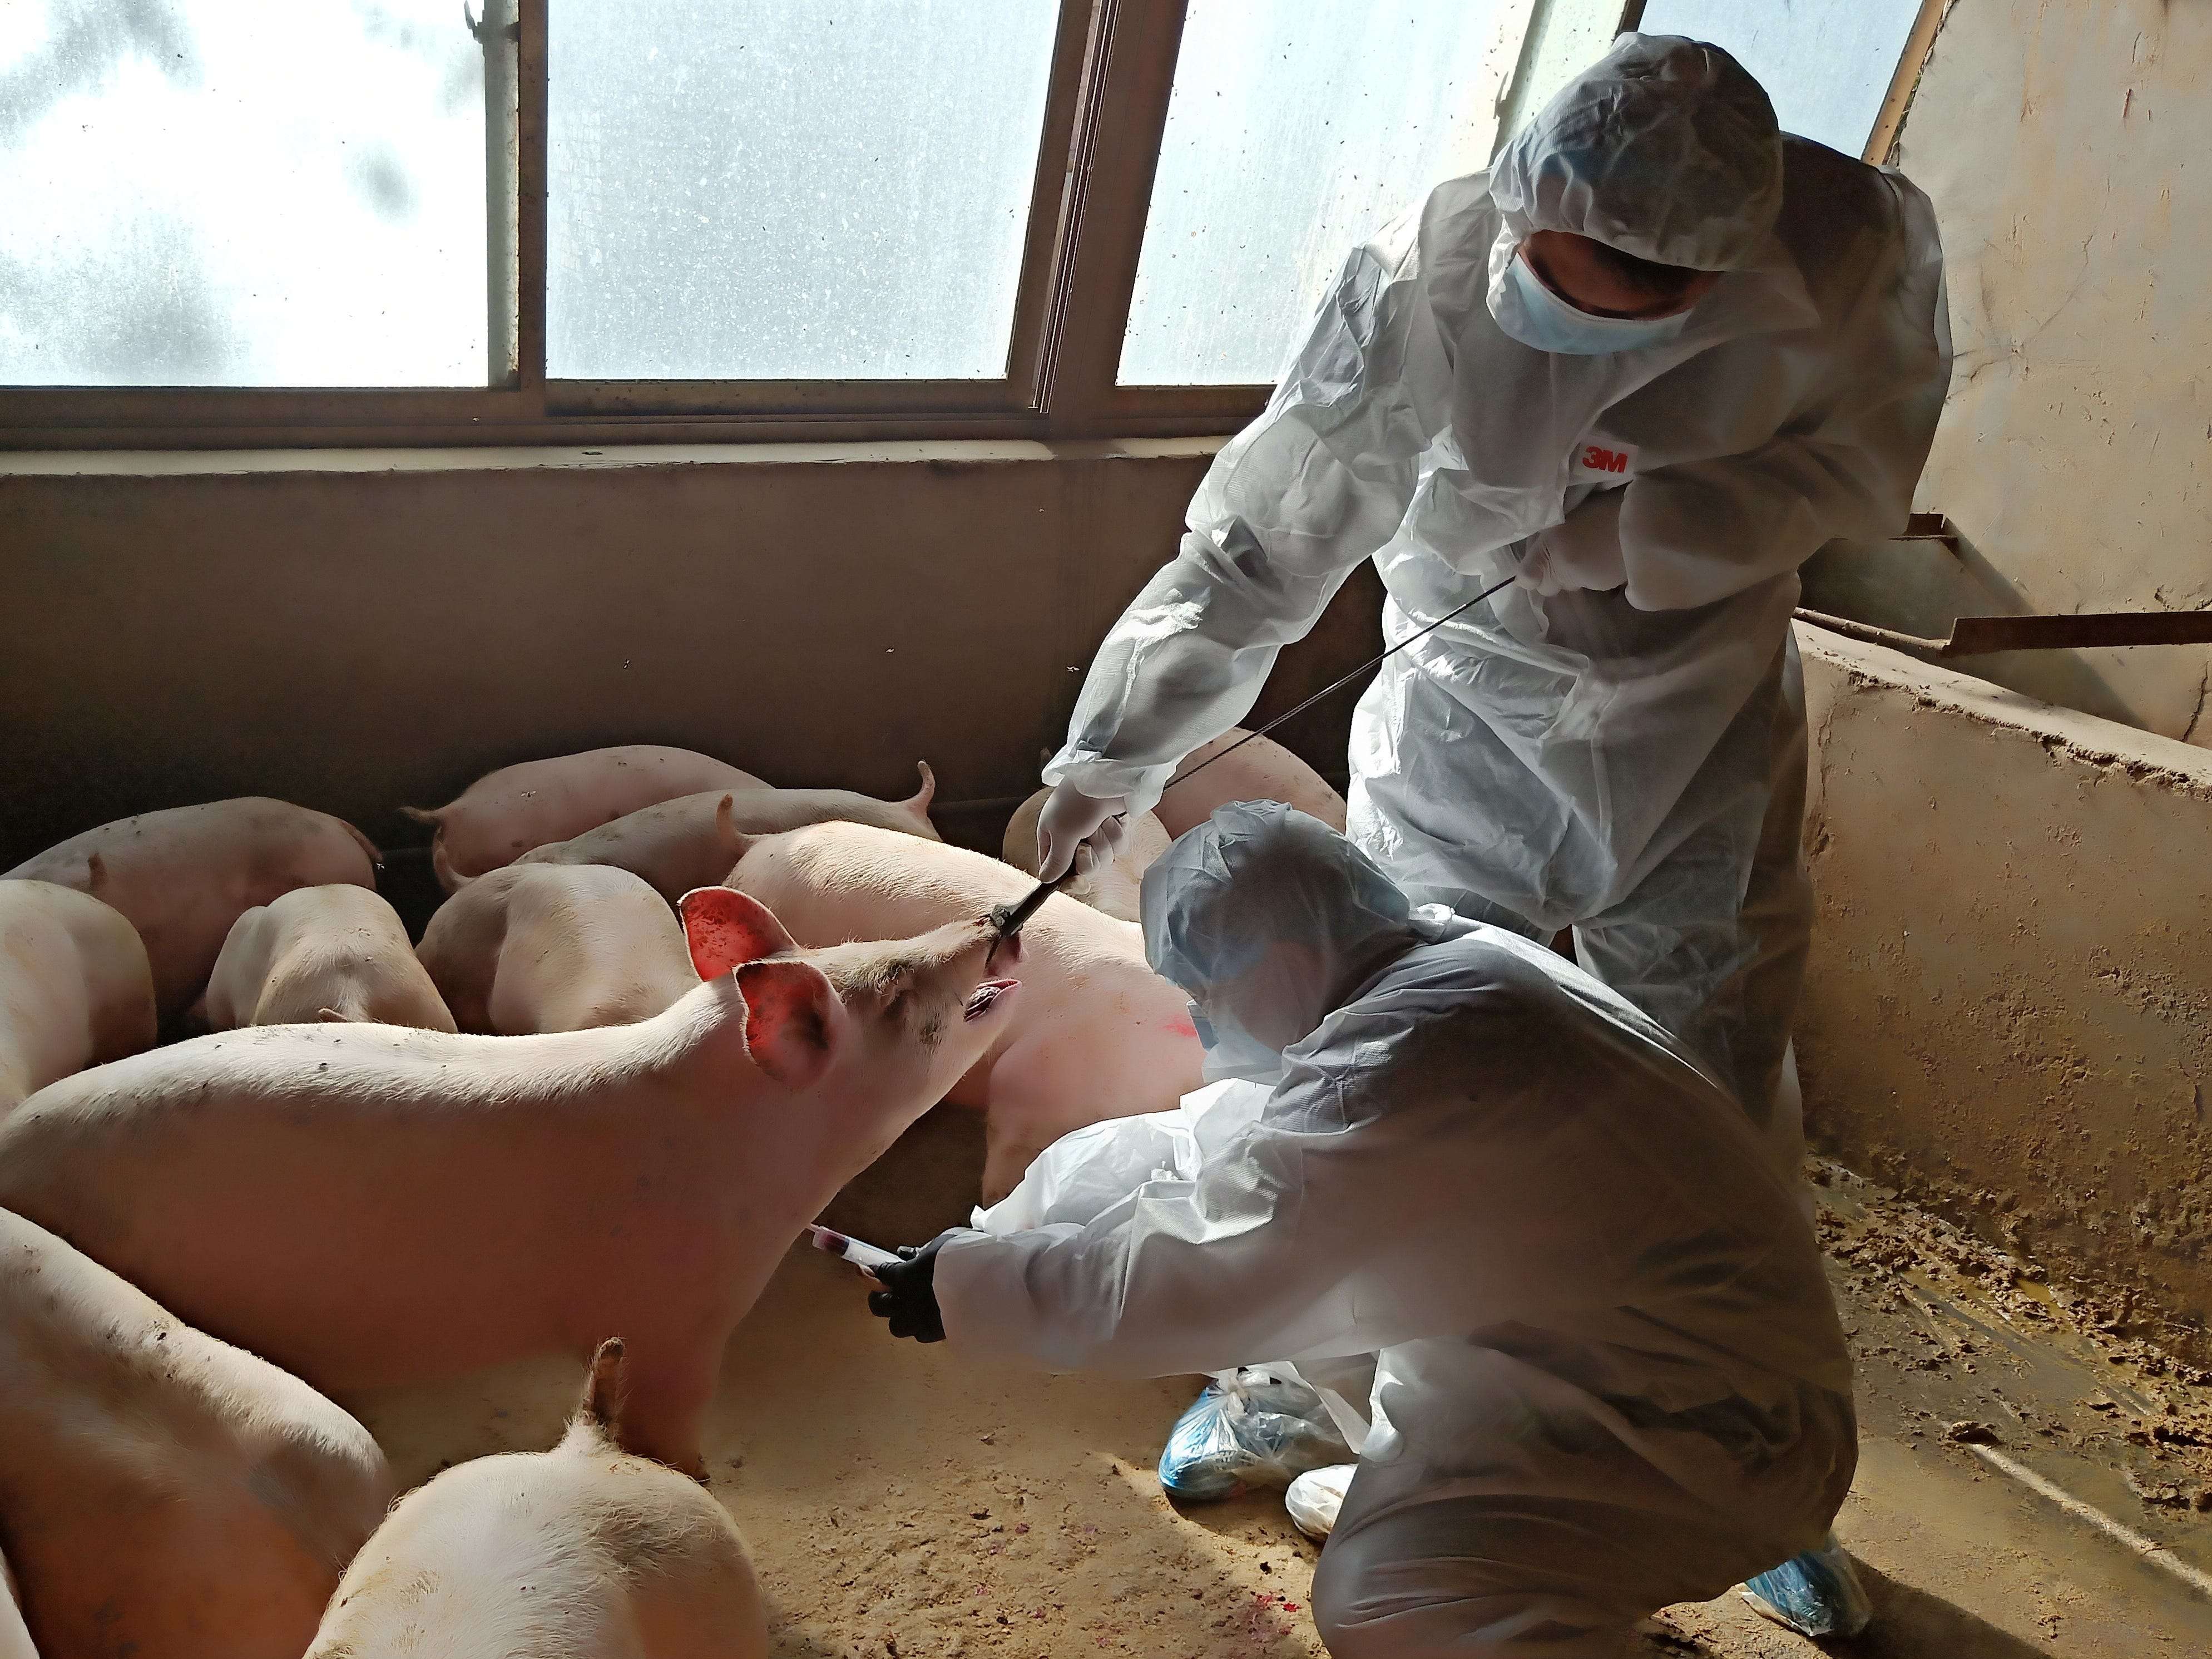 A new swine flu strain with 'pandemic potential' was just found ...